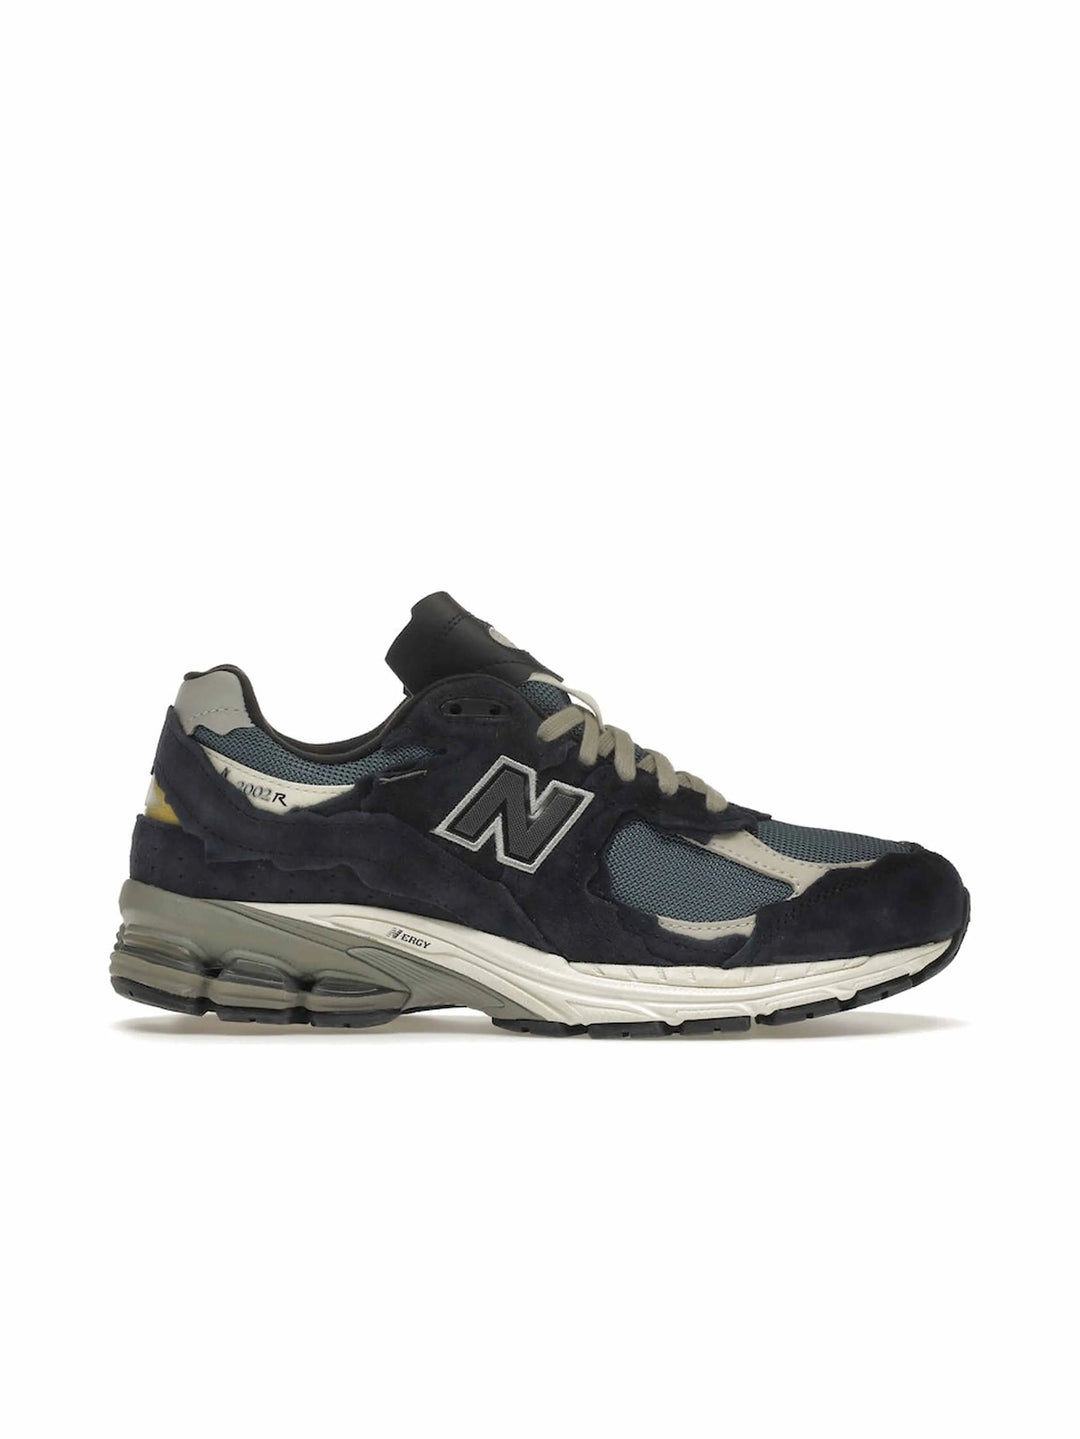 New Balance 2002R Protection Pack Dark Navy in Auckland, New Zealand - Shop name